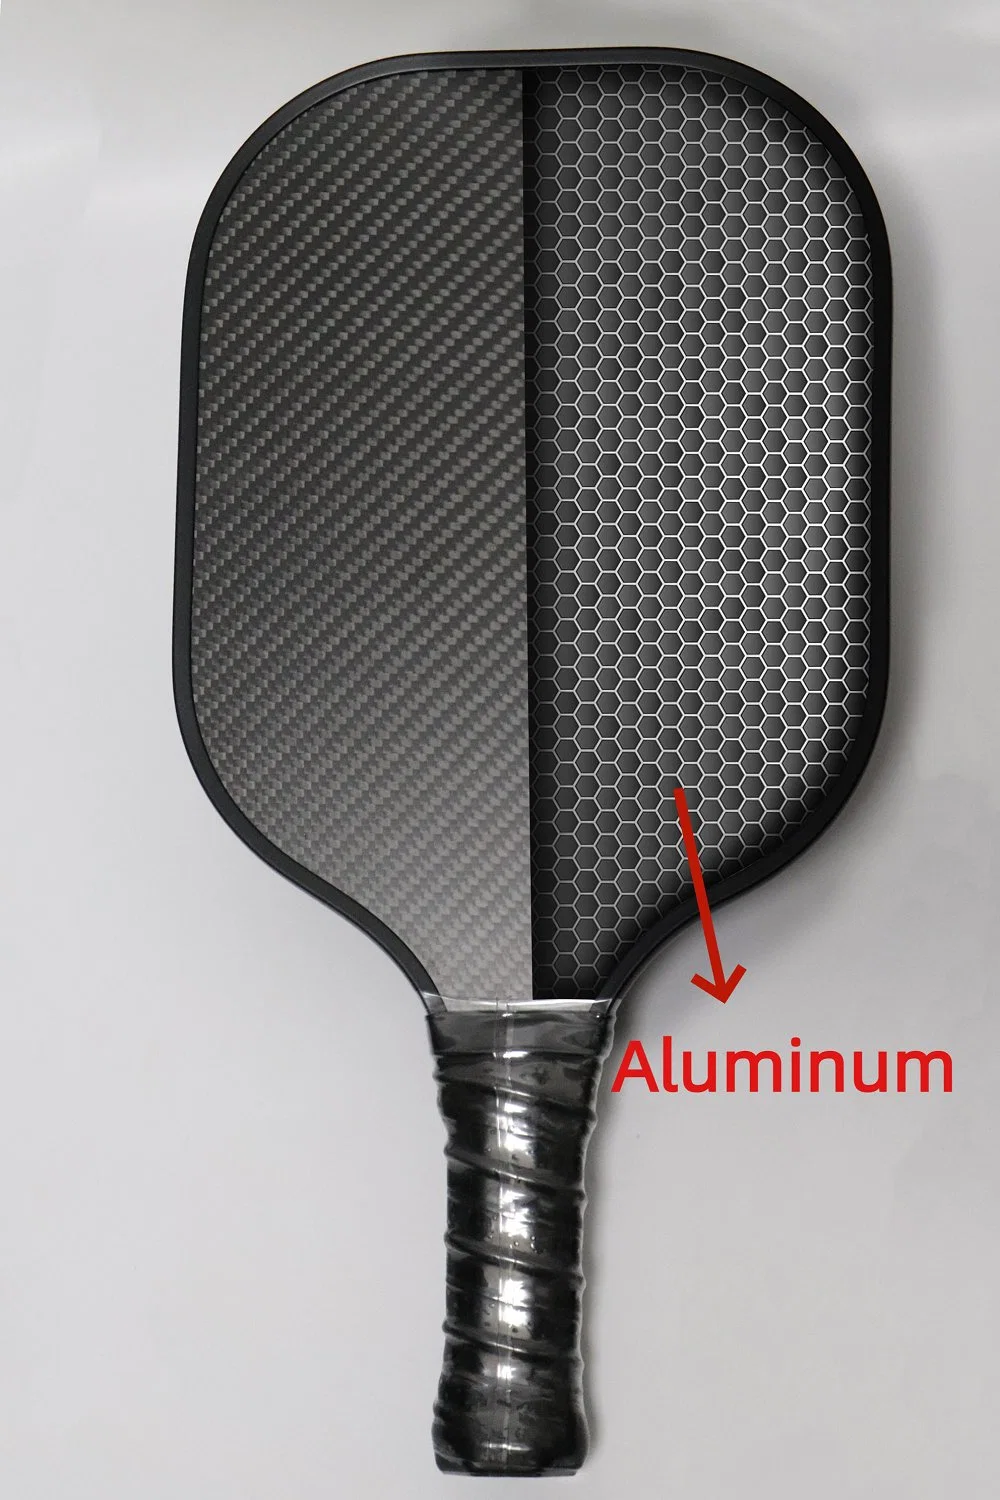 New Design Carbon Fiber 16mm Thickness with Added Power - Polypropylene Honeycomb Core Pickleball Paddle